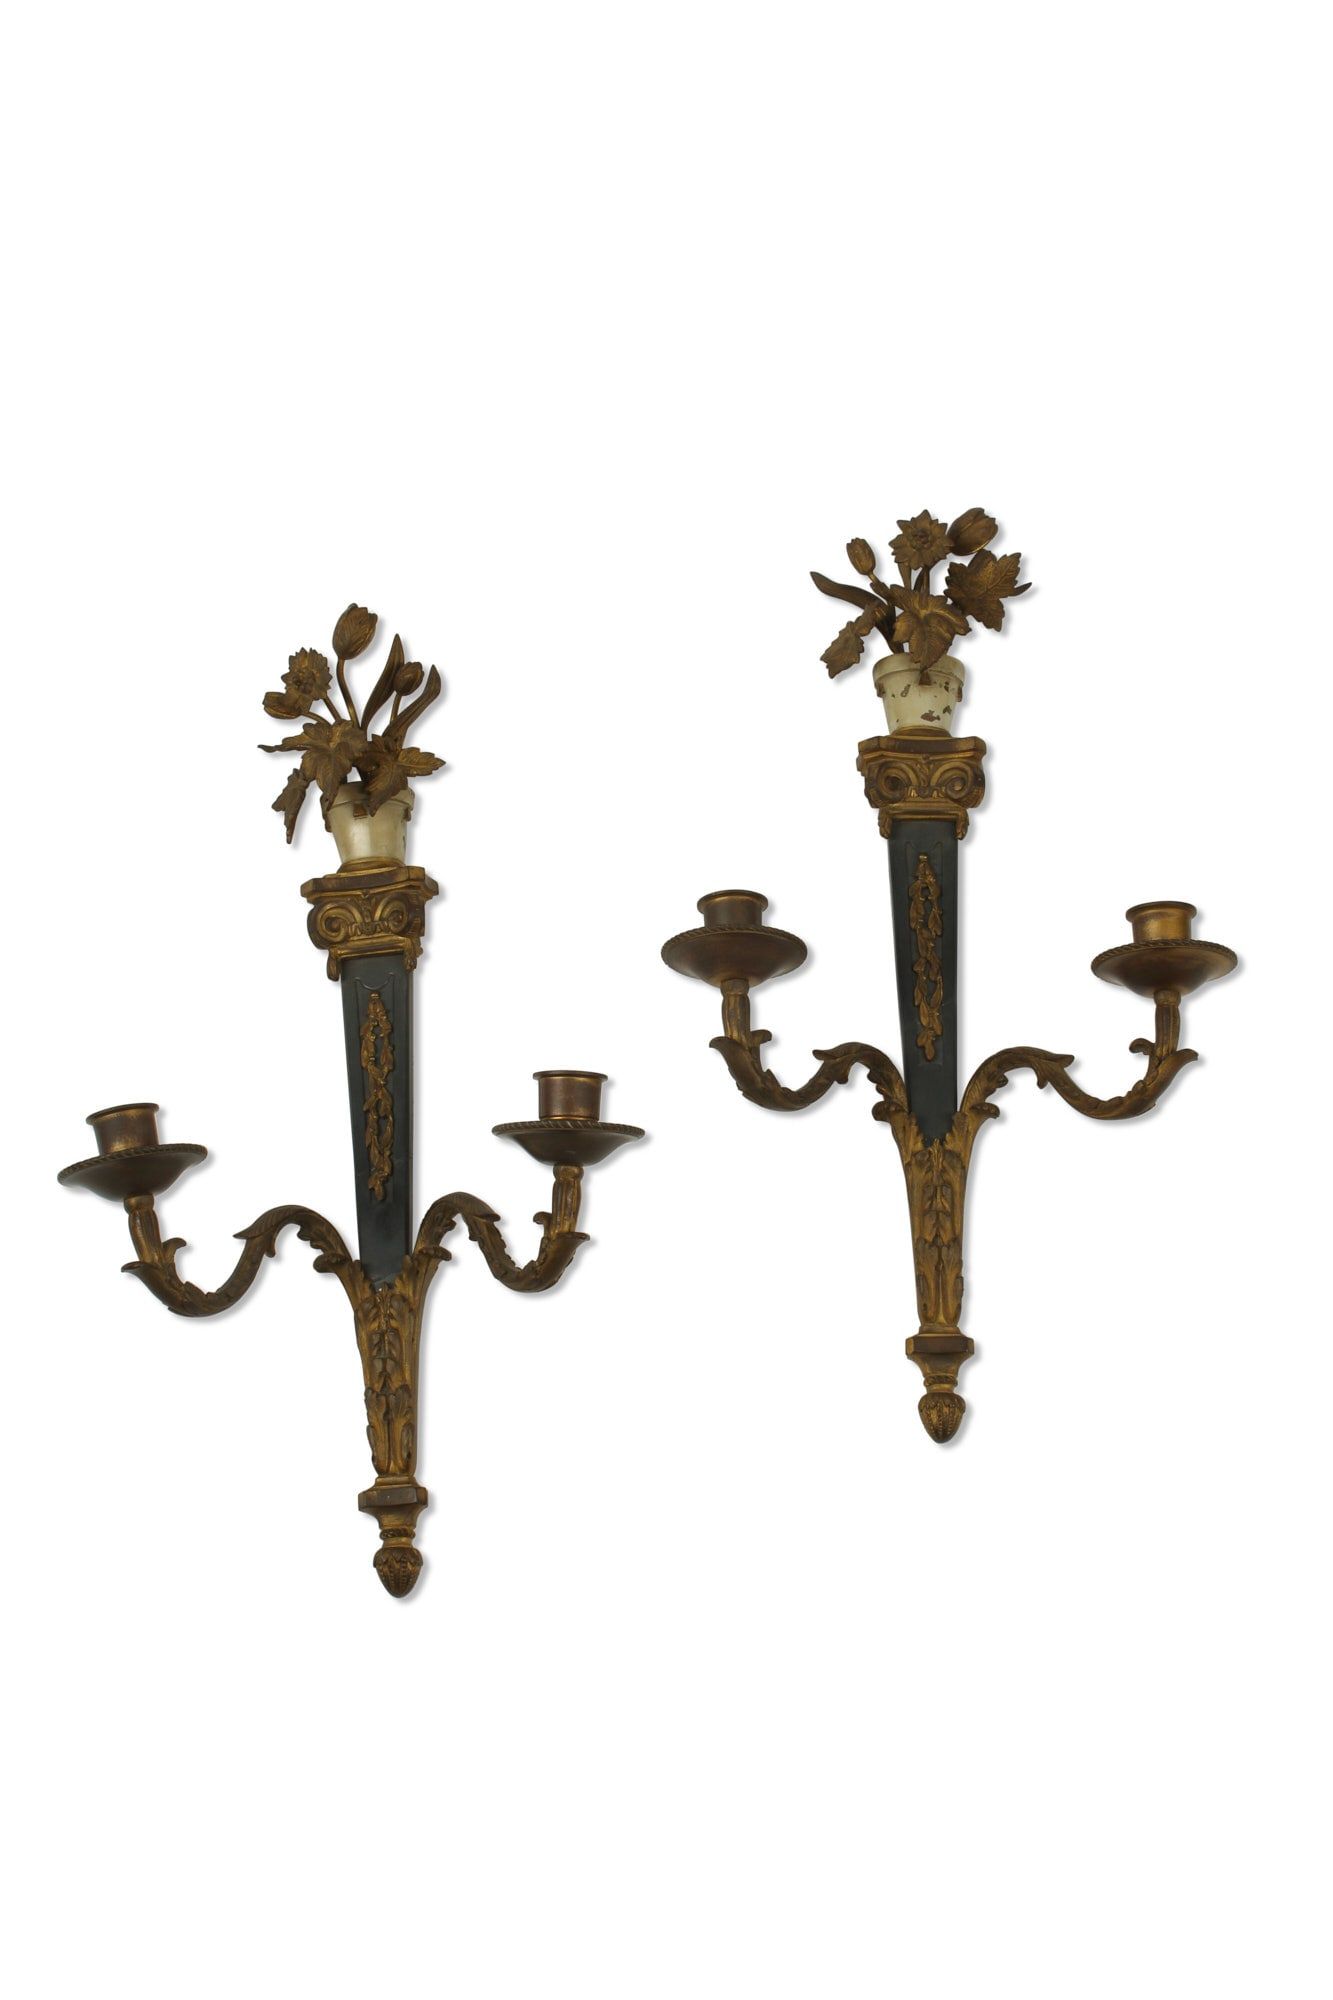 A PAIR OF EMPIRE STYLE WALL SCONCESA